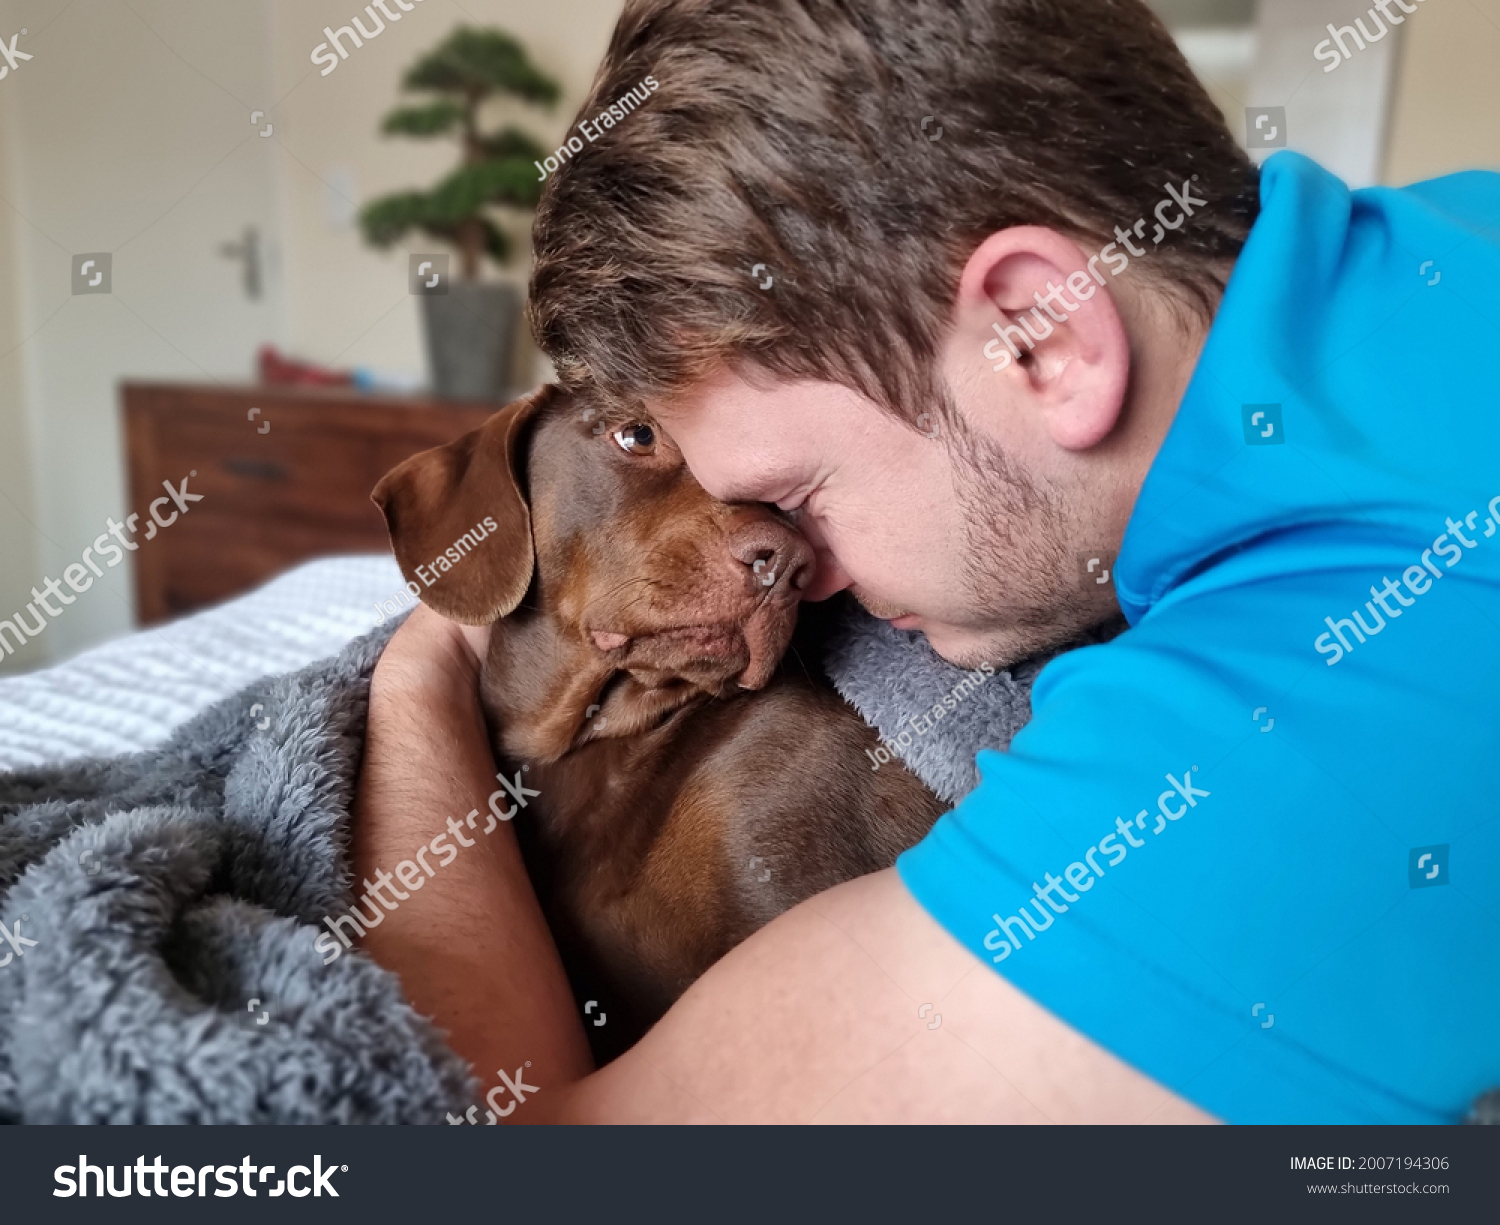 Portrait of happy brown labrador dog looking lovingly at owner. Man embraces canine while on the bed under the blankets. Emotional animal support. #2007194306